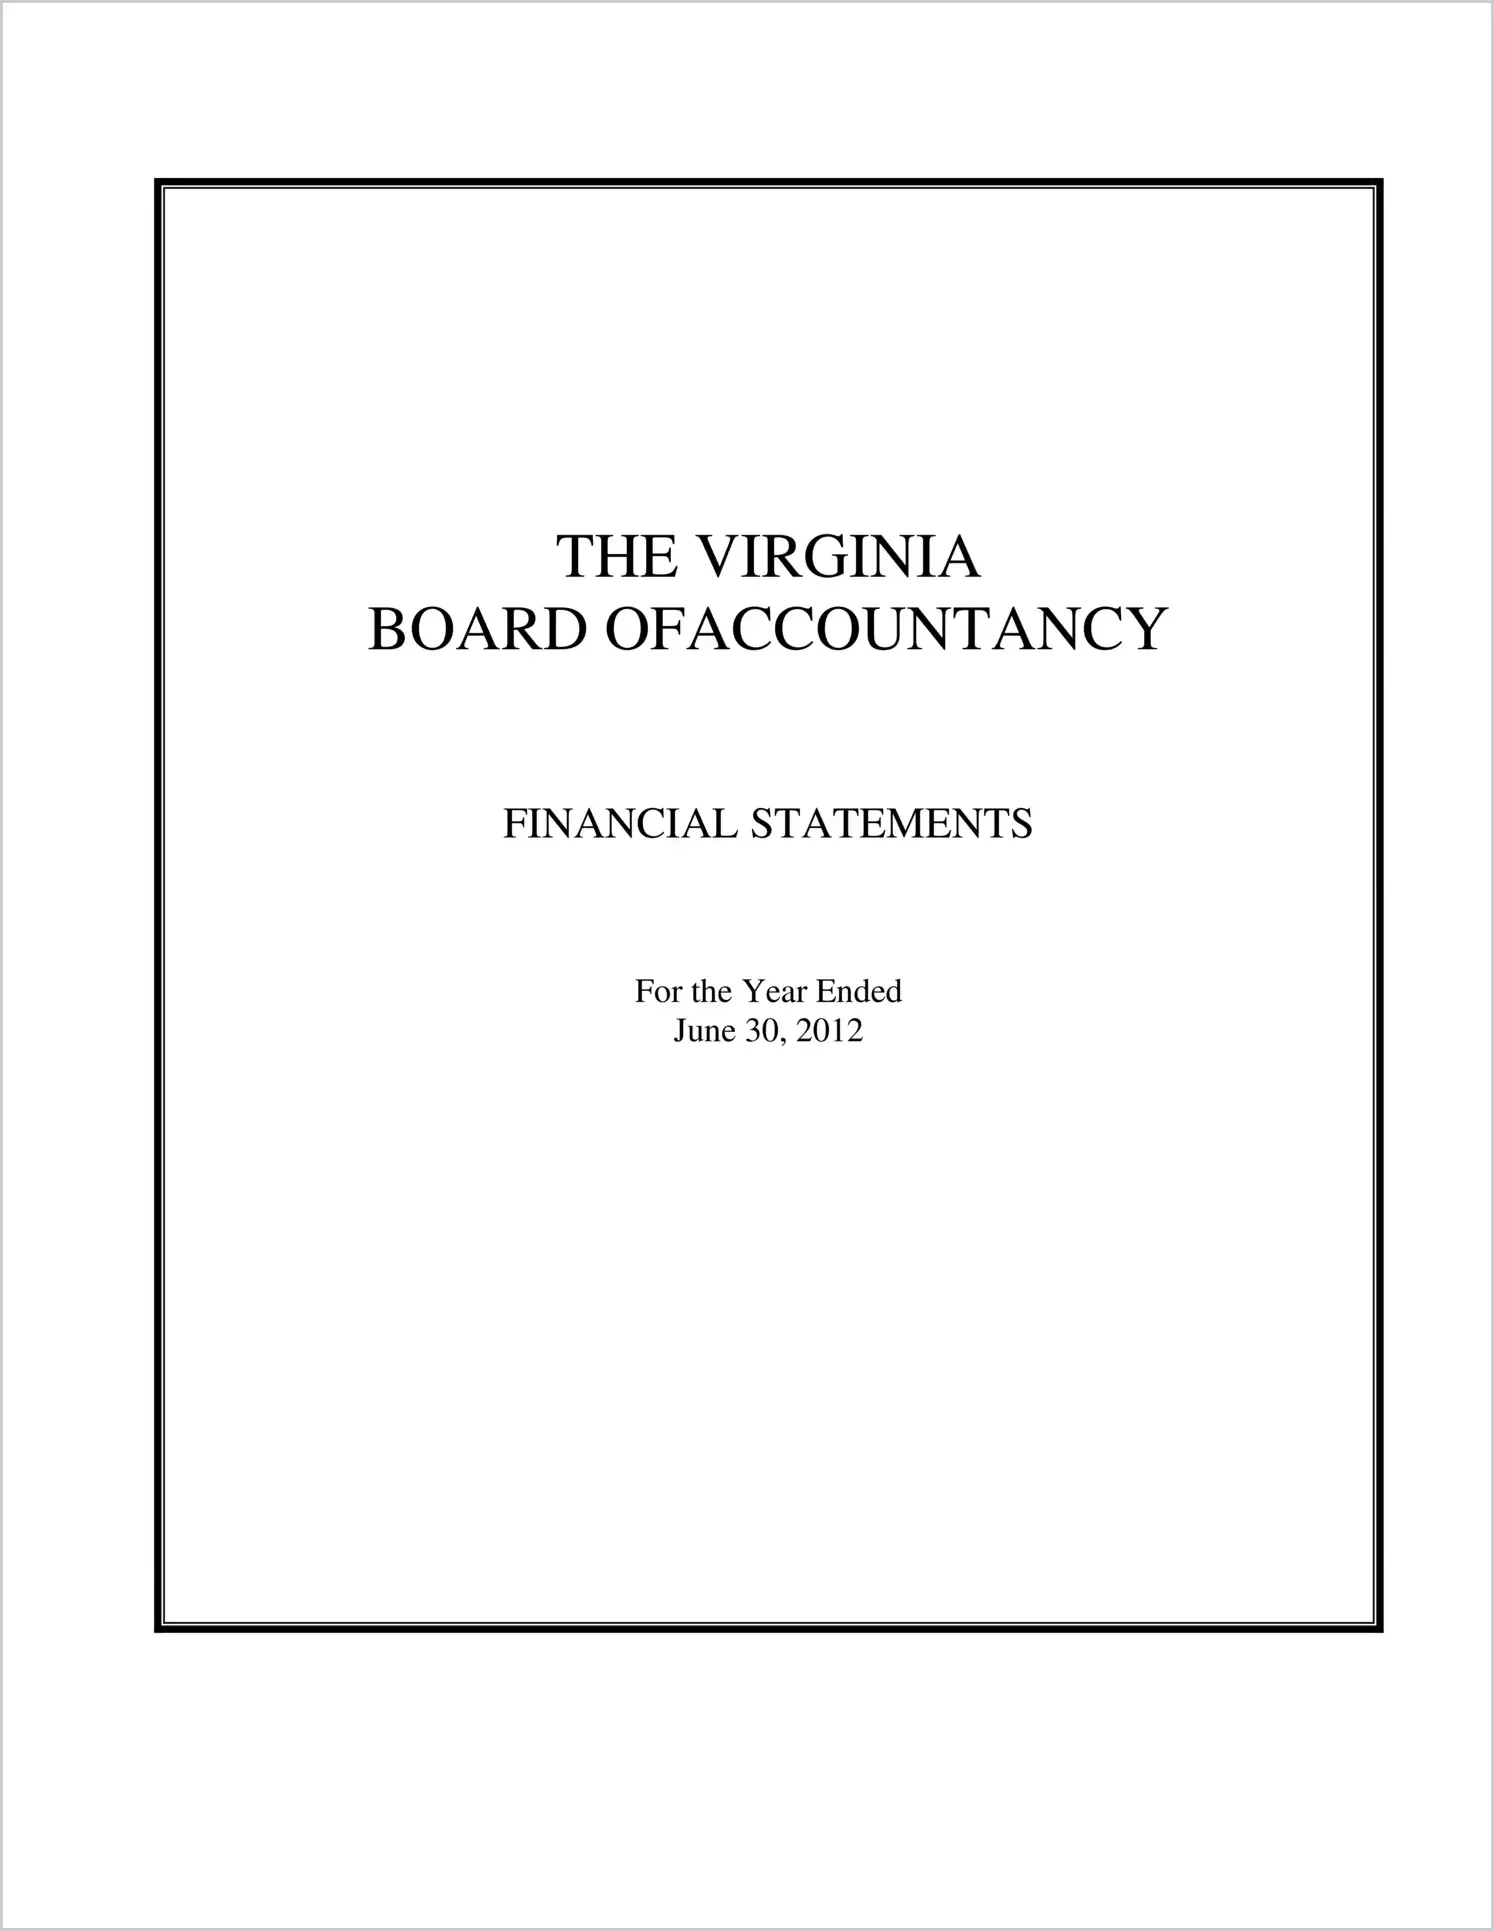 Virginia Board of Accountancy Financial Statements for the year ended June 30, 2012